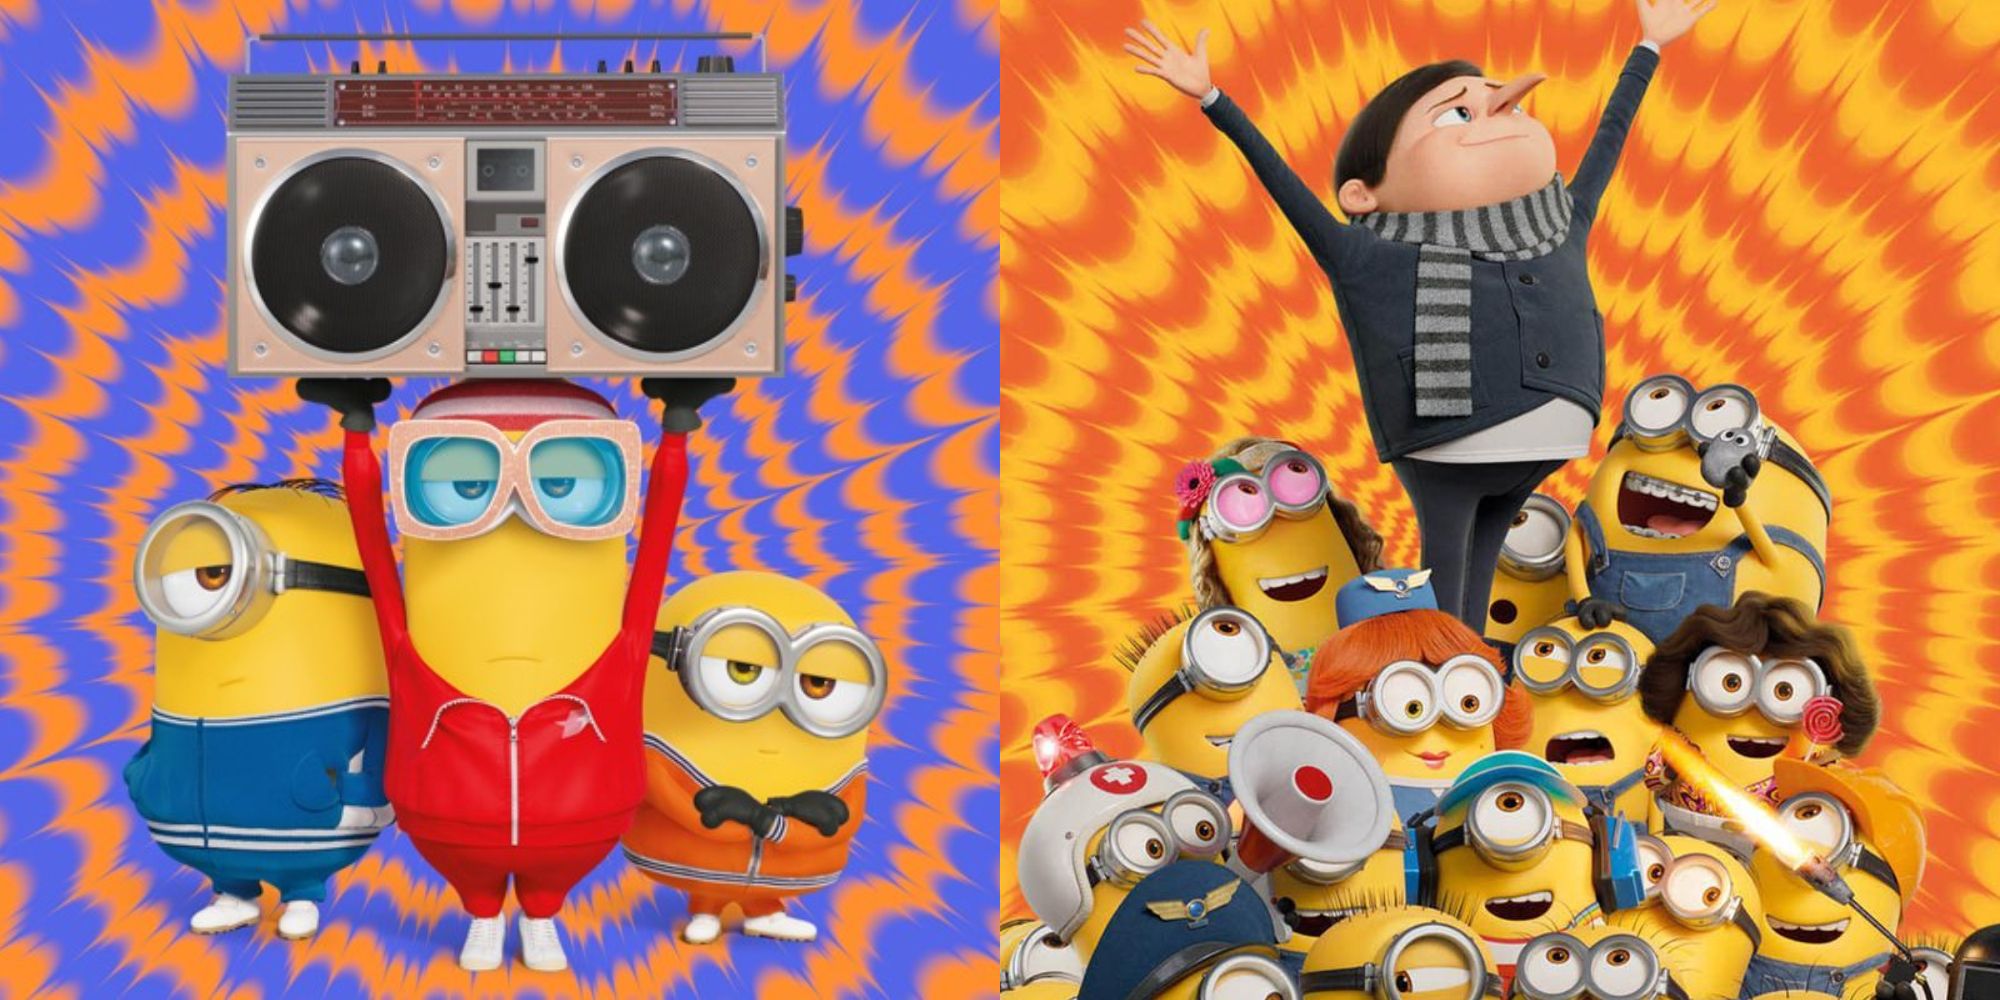 Split image showing the minions and young Gru in Minions: The Rise of Gru.